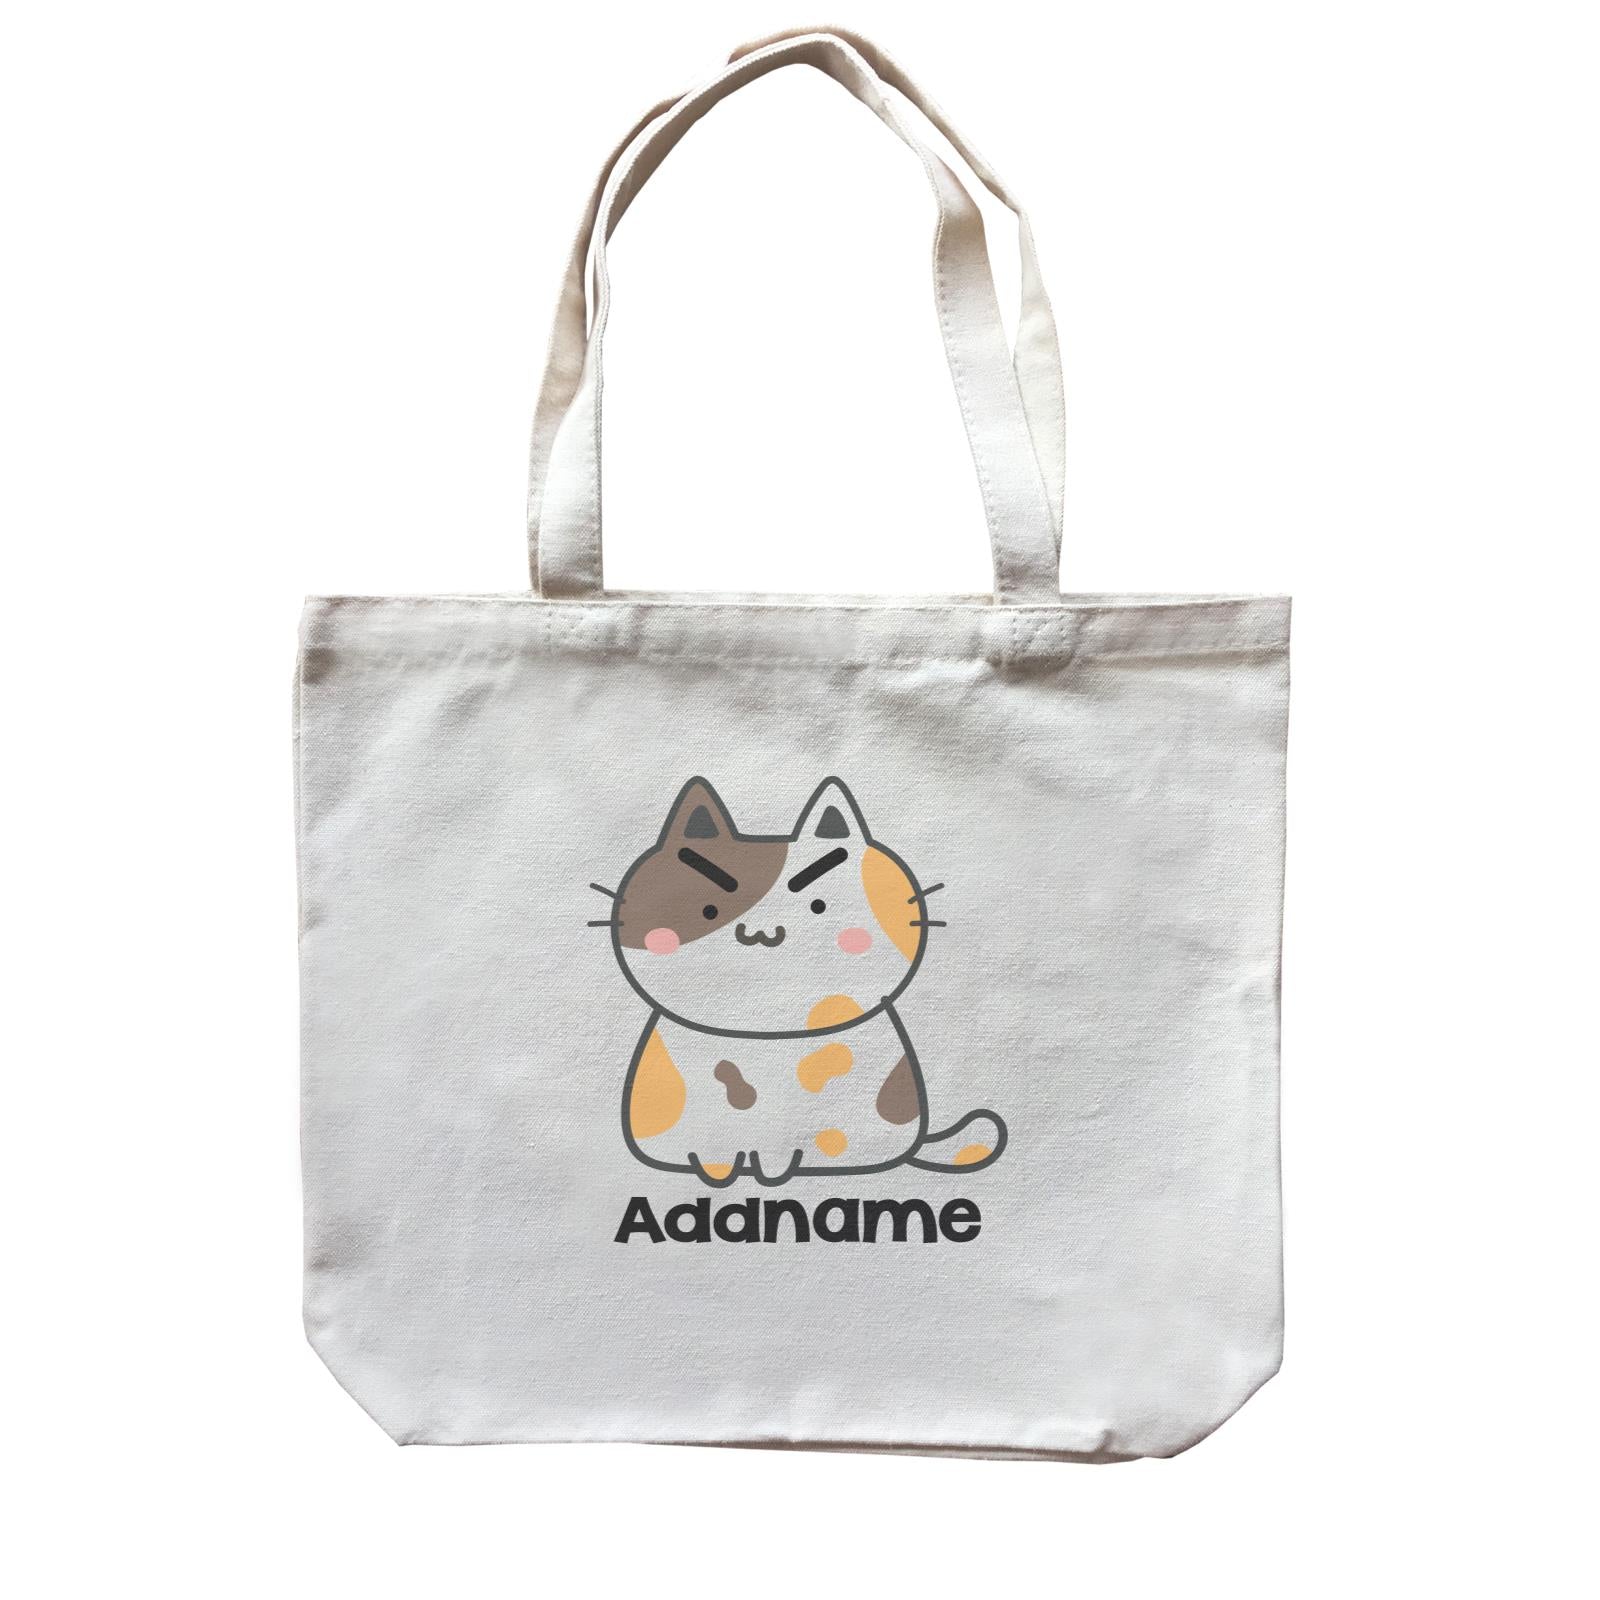 Drawn Adorable Cats Angry Cat Addname Canvas Bag